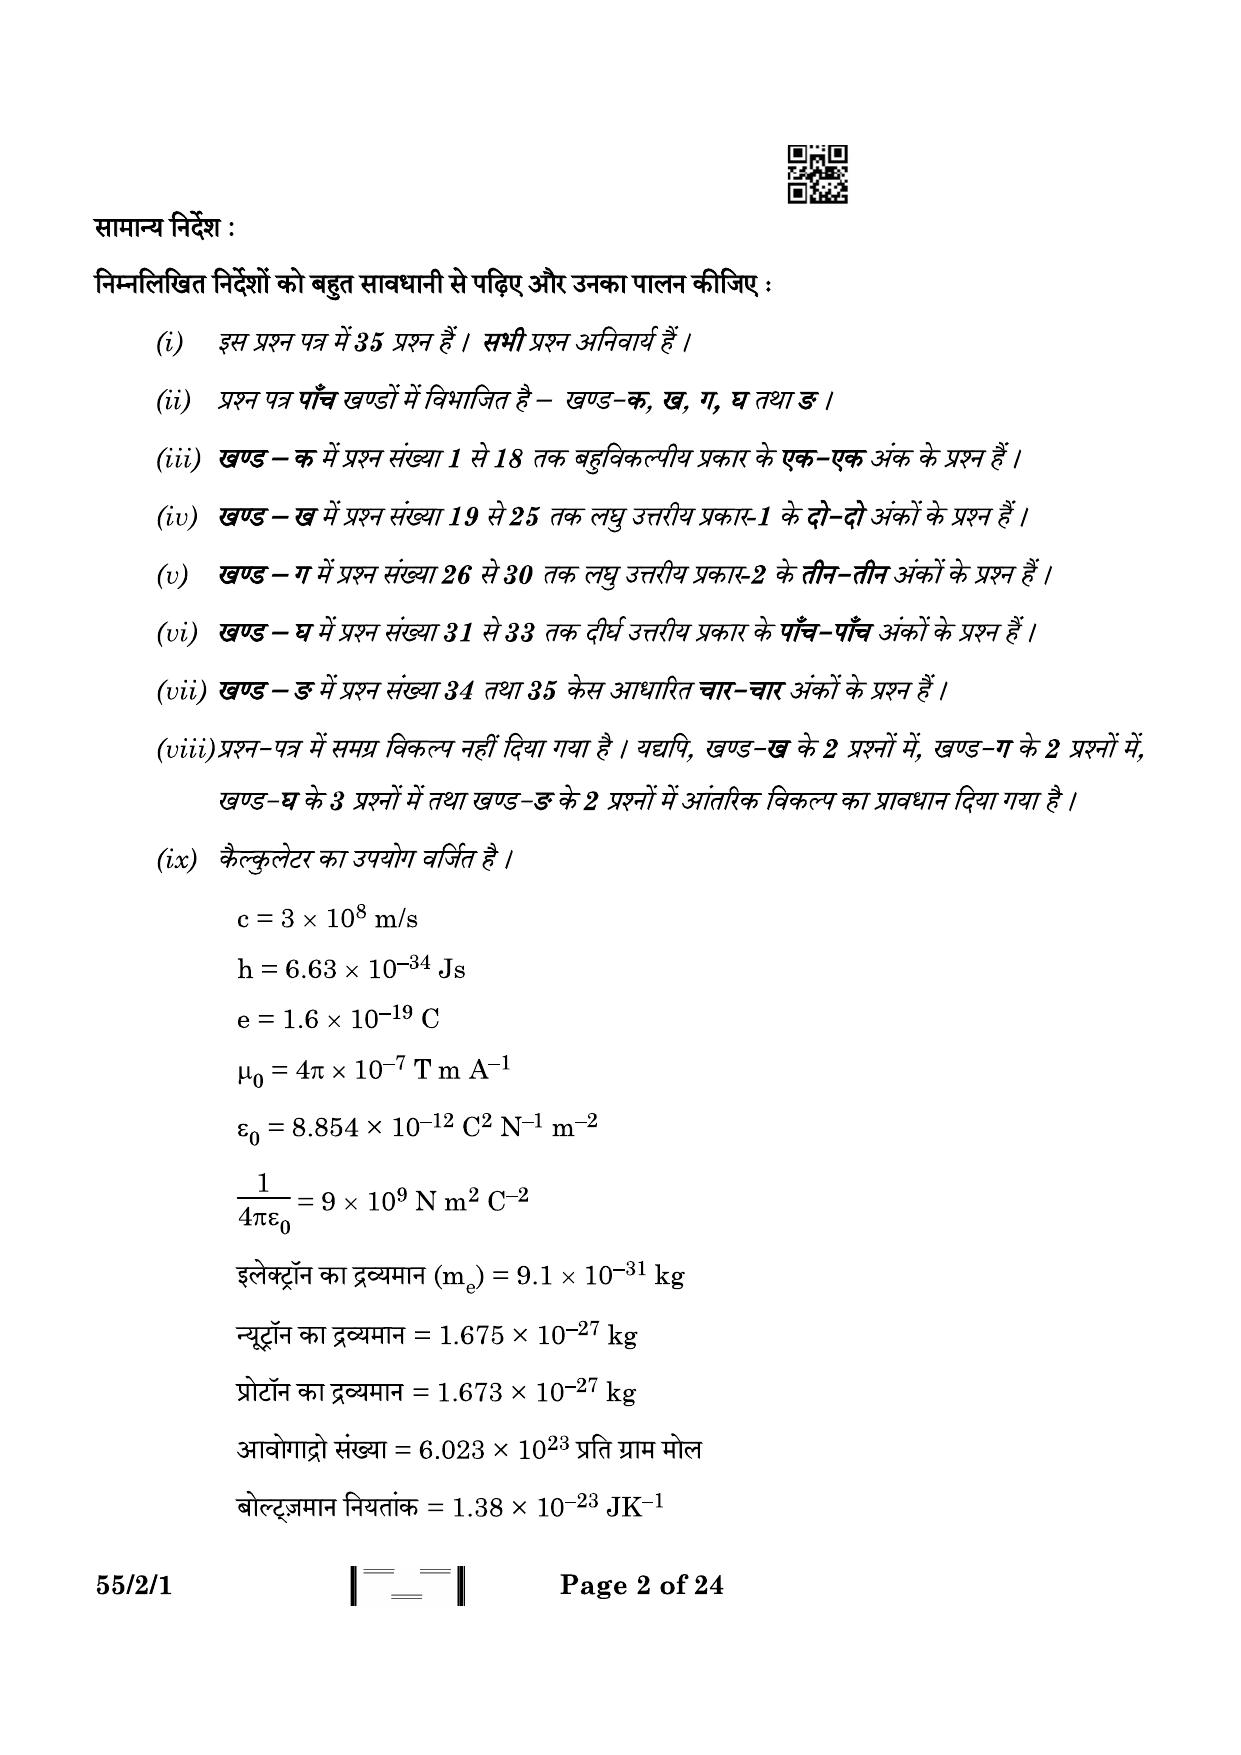 CBSE Class 12 55-2-1 Physics 2023 Question Paper - Page 2